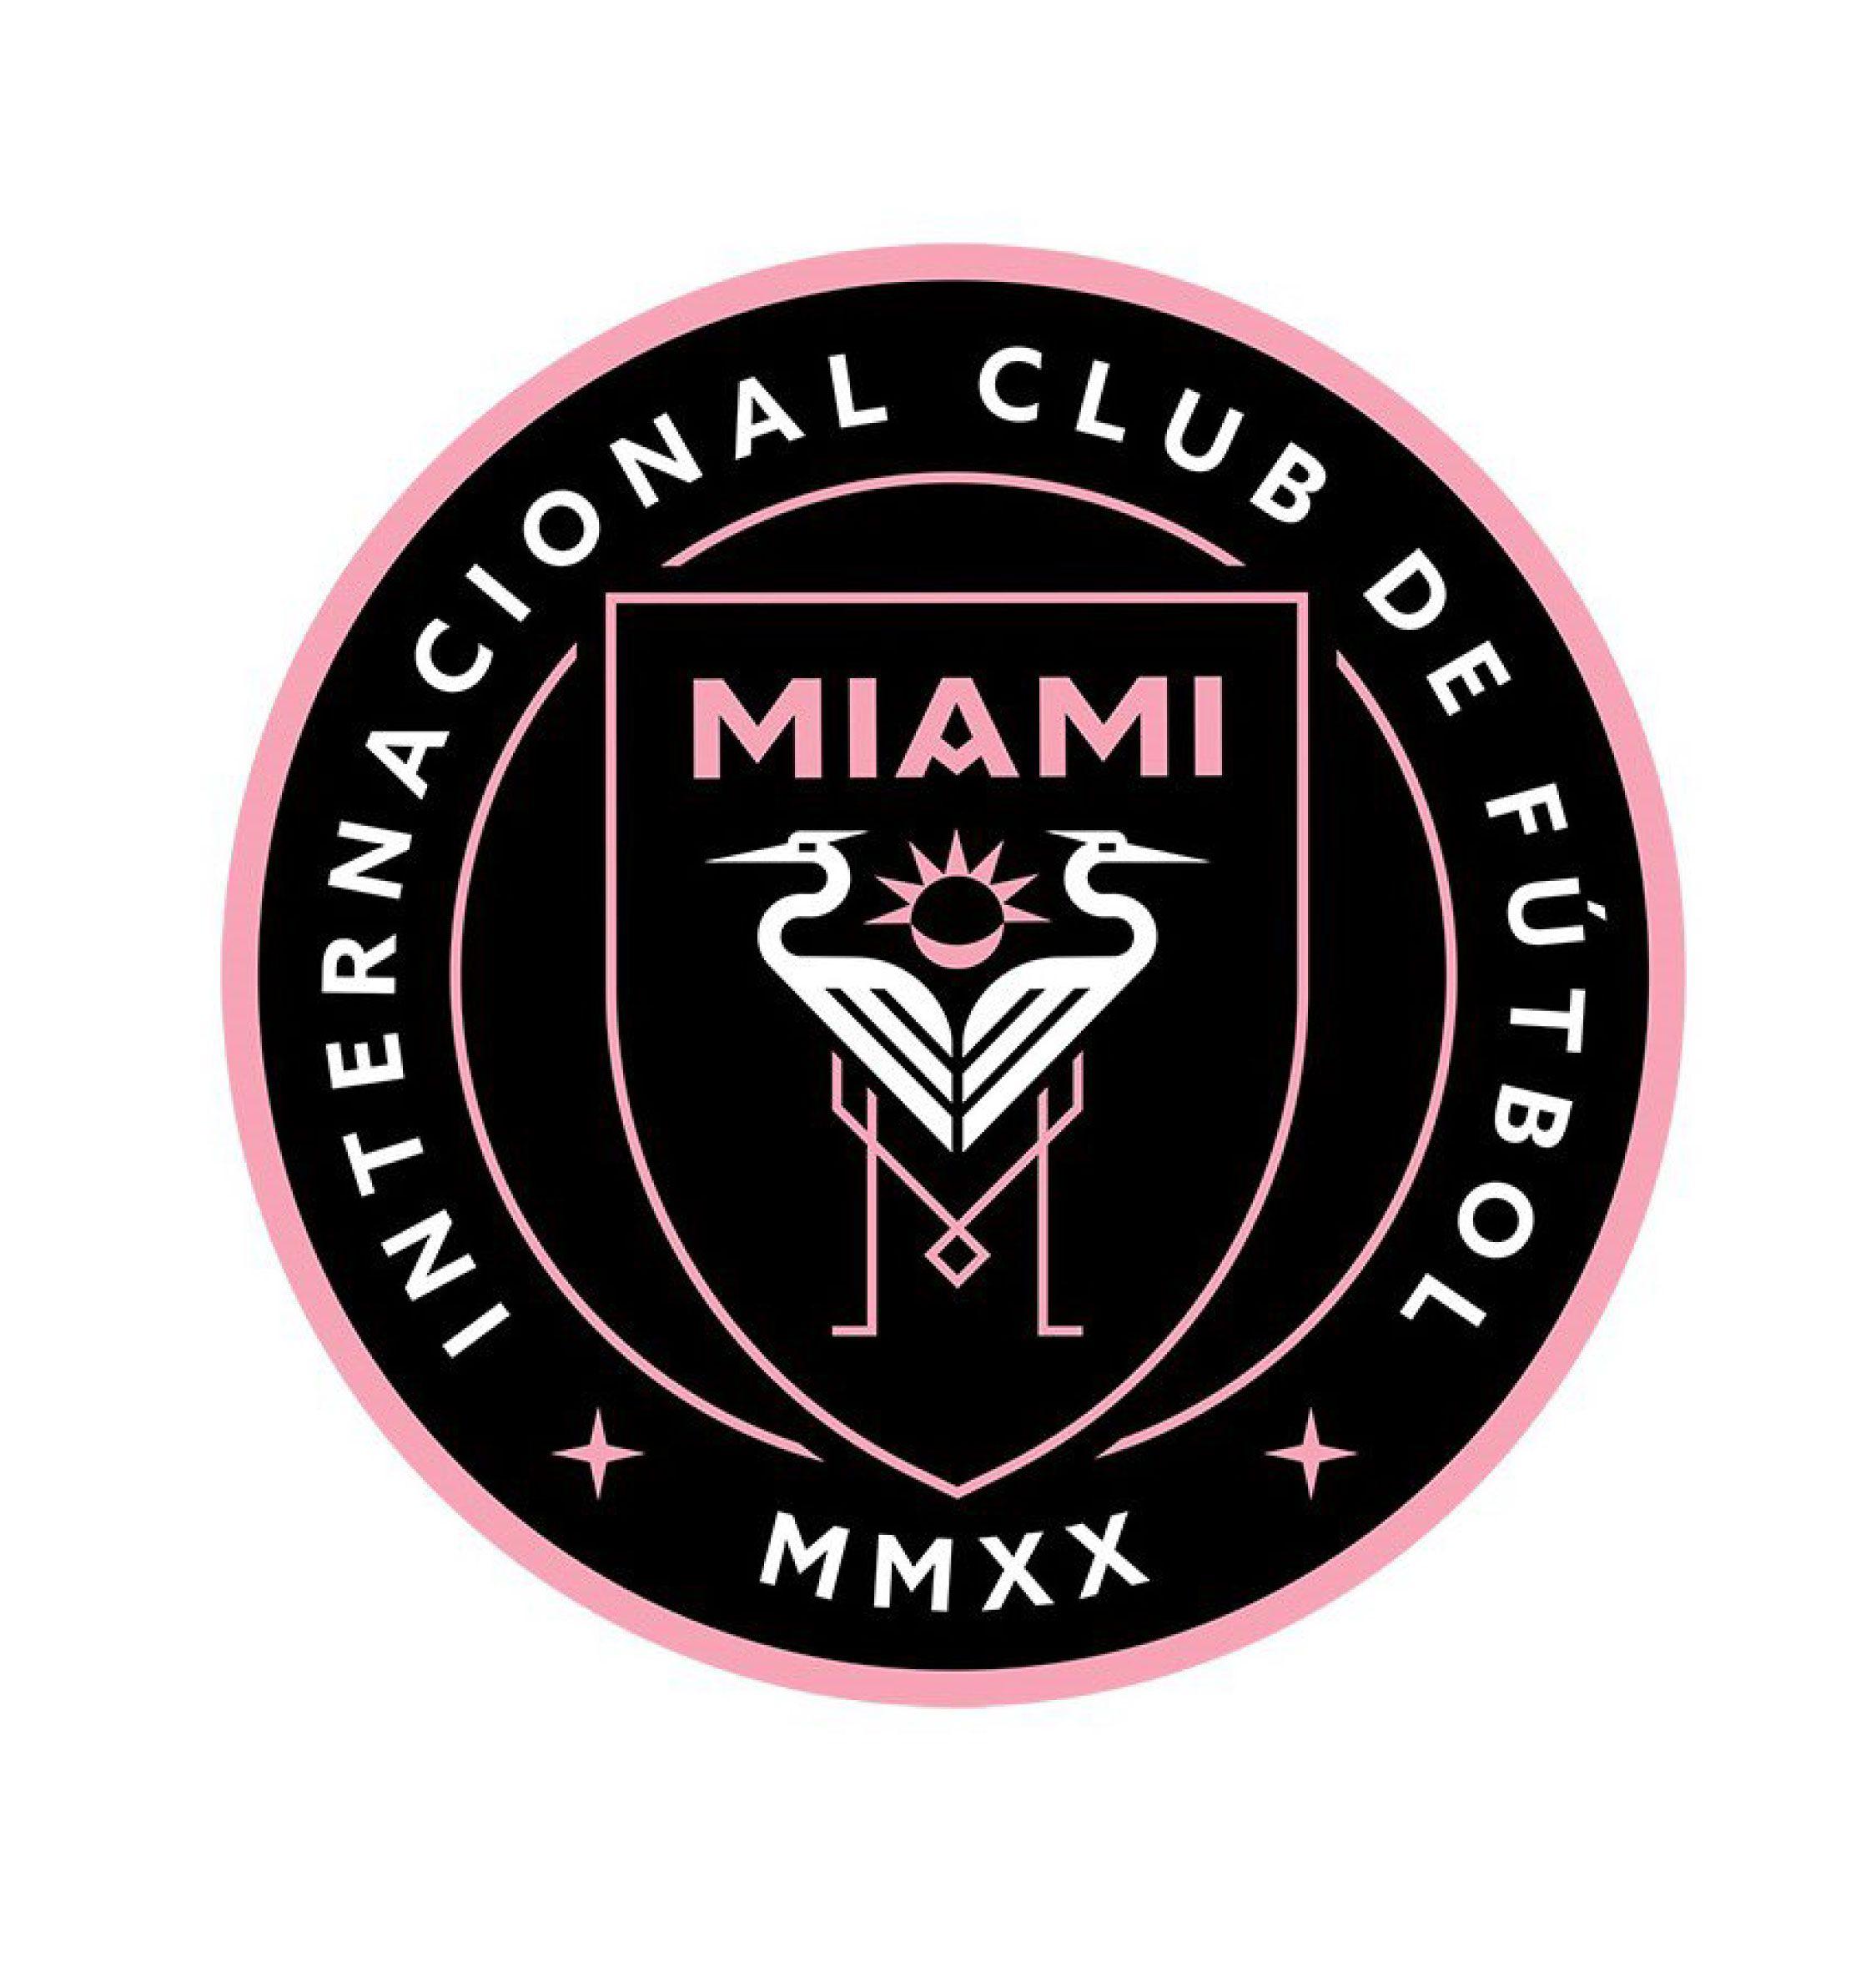 6 Logo - Could this be the new logo for David Beckham's Miami football club ...